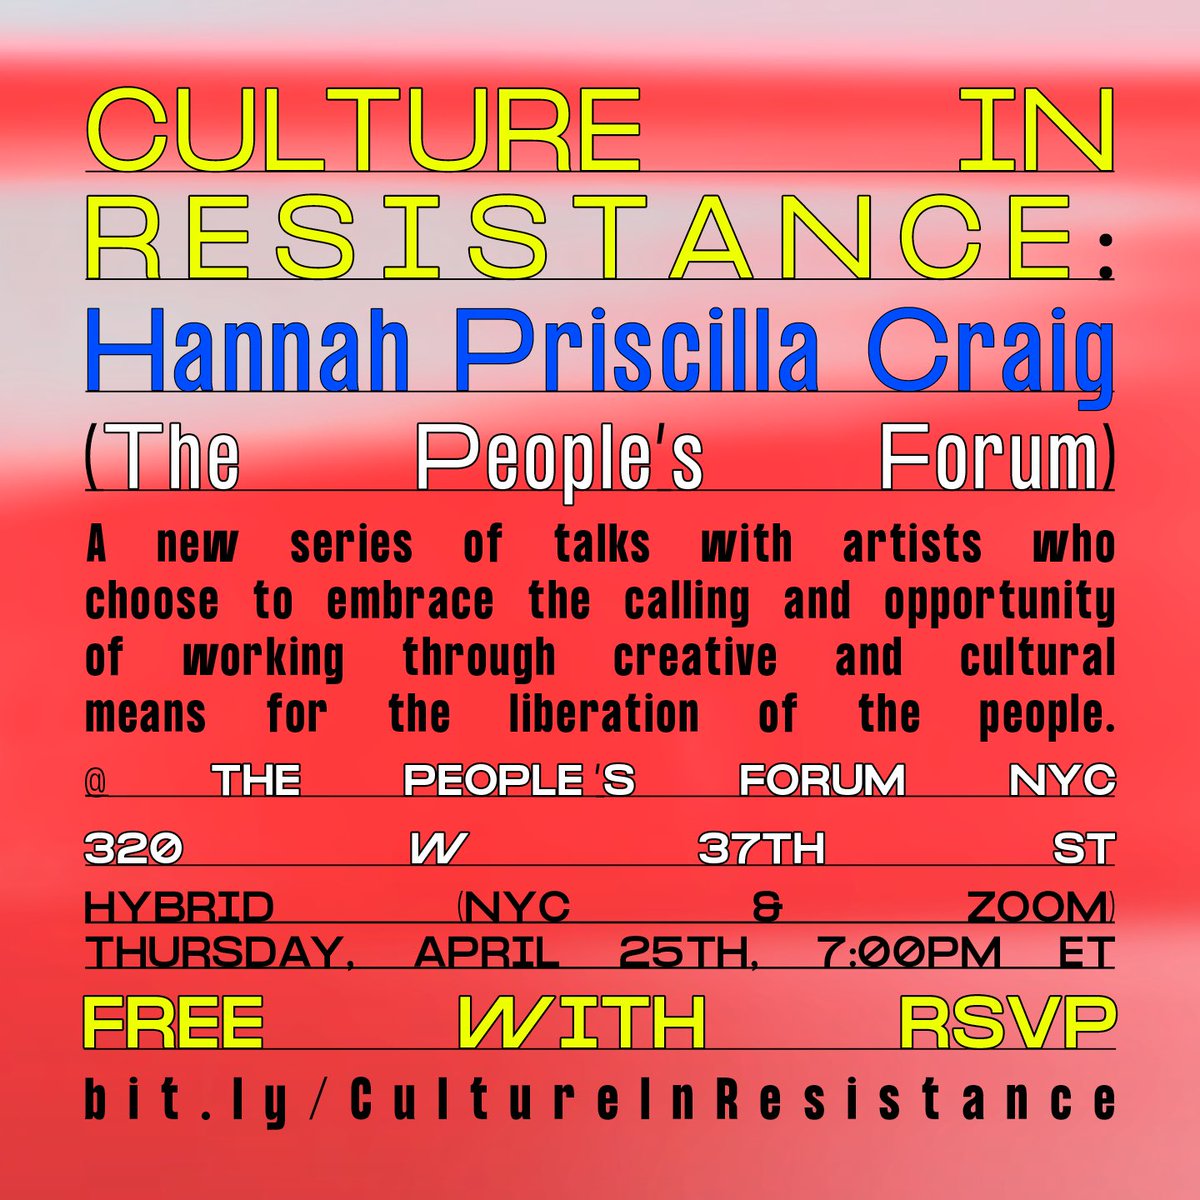 Culture In Resistance is a new series of talks with artists who choose to embrace the calling and opportunity of working through creative and cultural means for the liberation of the people. 

Free hybrid event (NYC + Zoom): bit.ly/CultureInResis…

#A4A #CultureInResistance